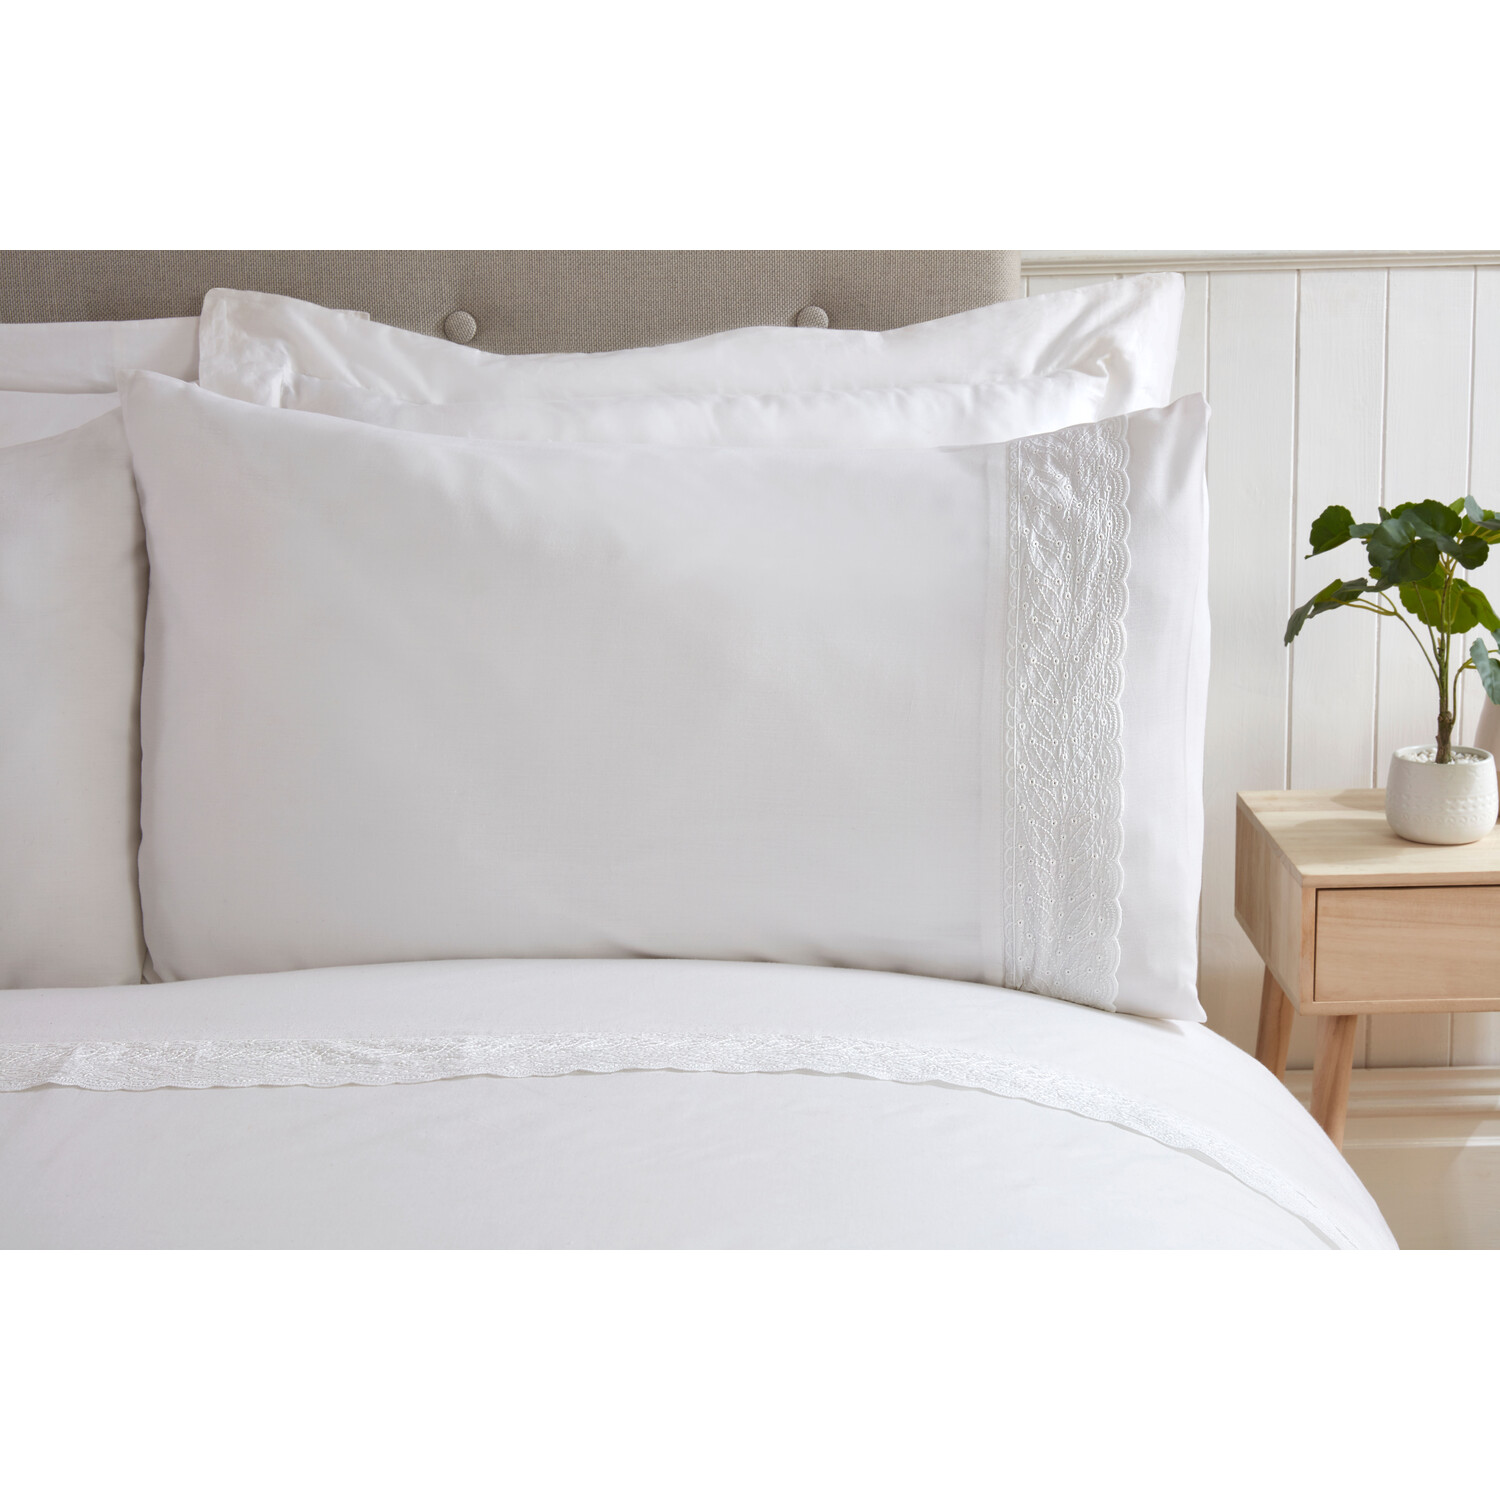 Evelyn Embroidered Duvet Cover and Pillowcase Set  - White / Super King size Image 3